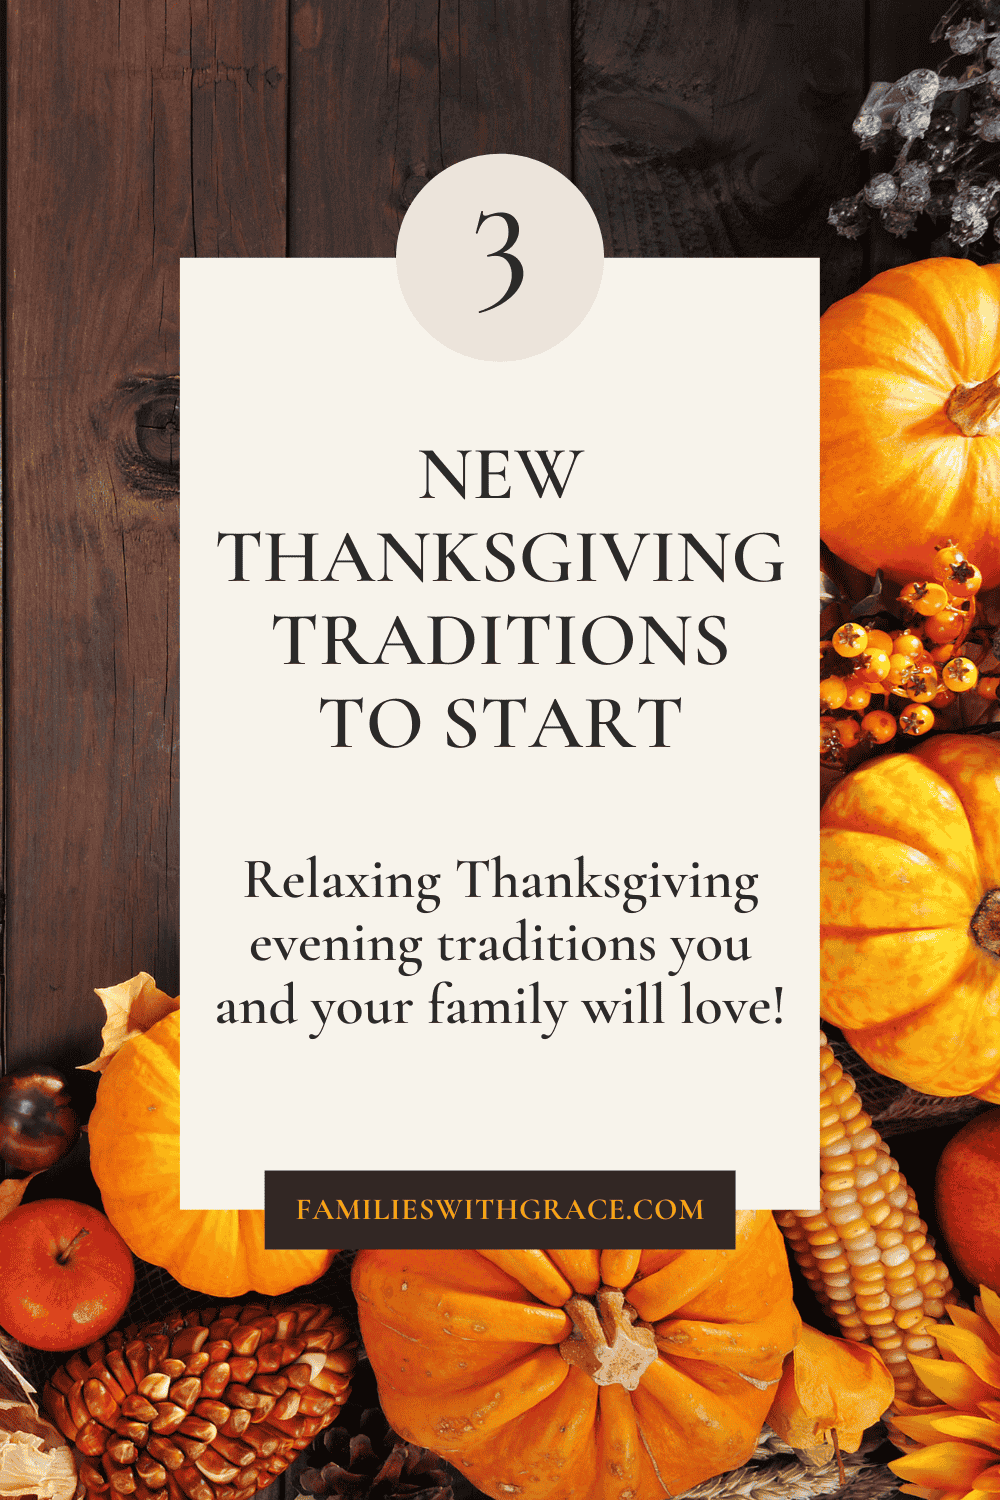 3 New Thanksgiving traditions to start